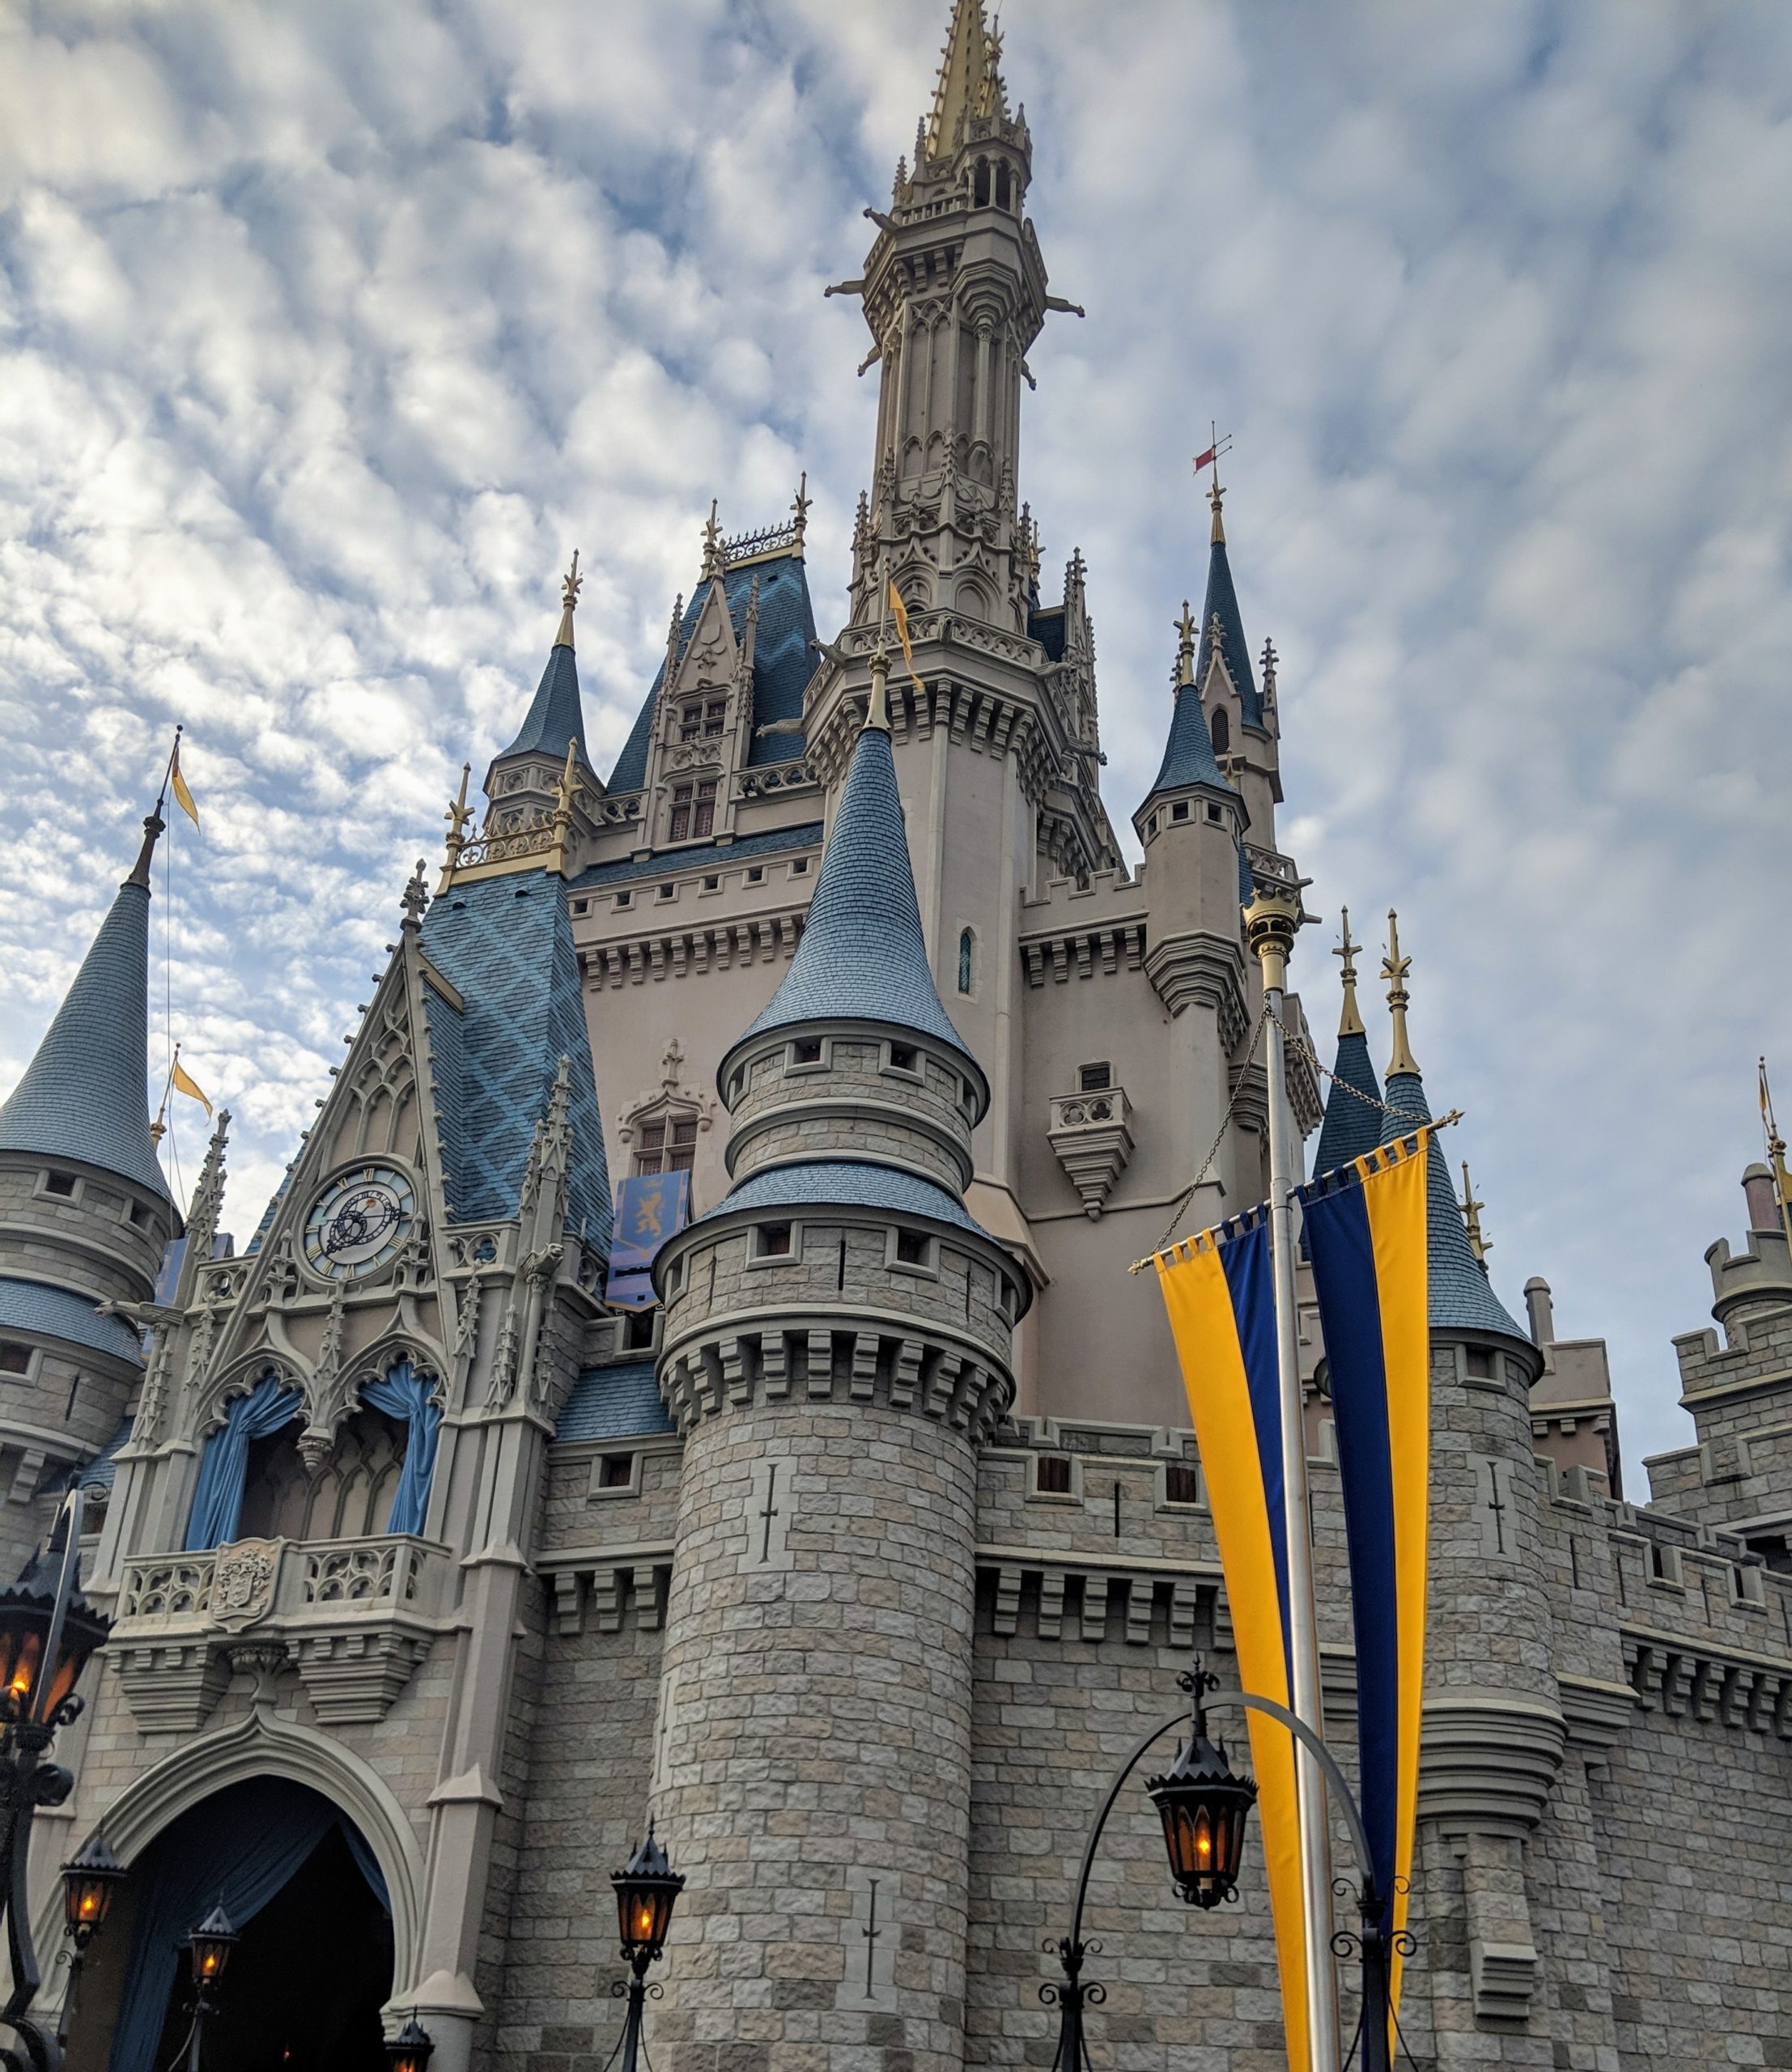 Disney World Reopening Guidelines as well as Central Florida